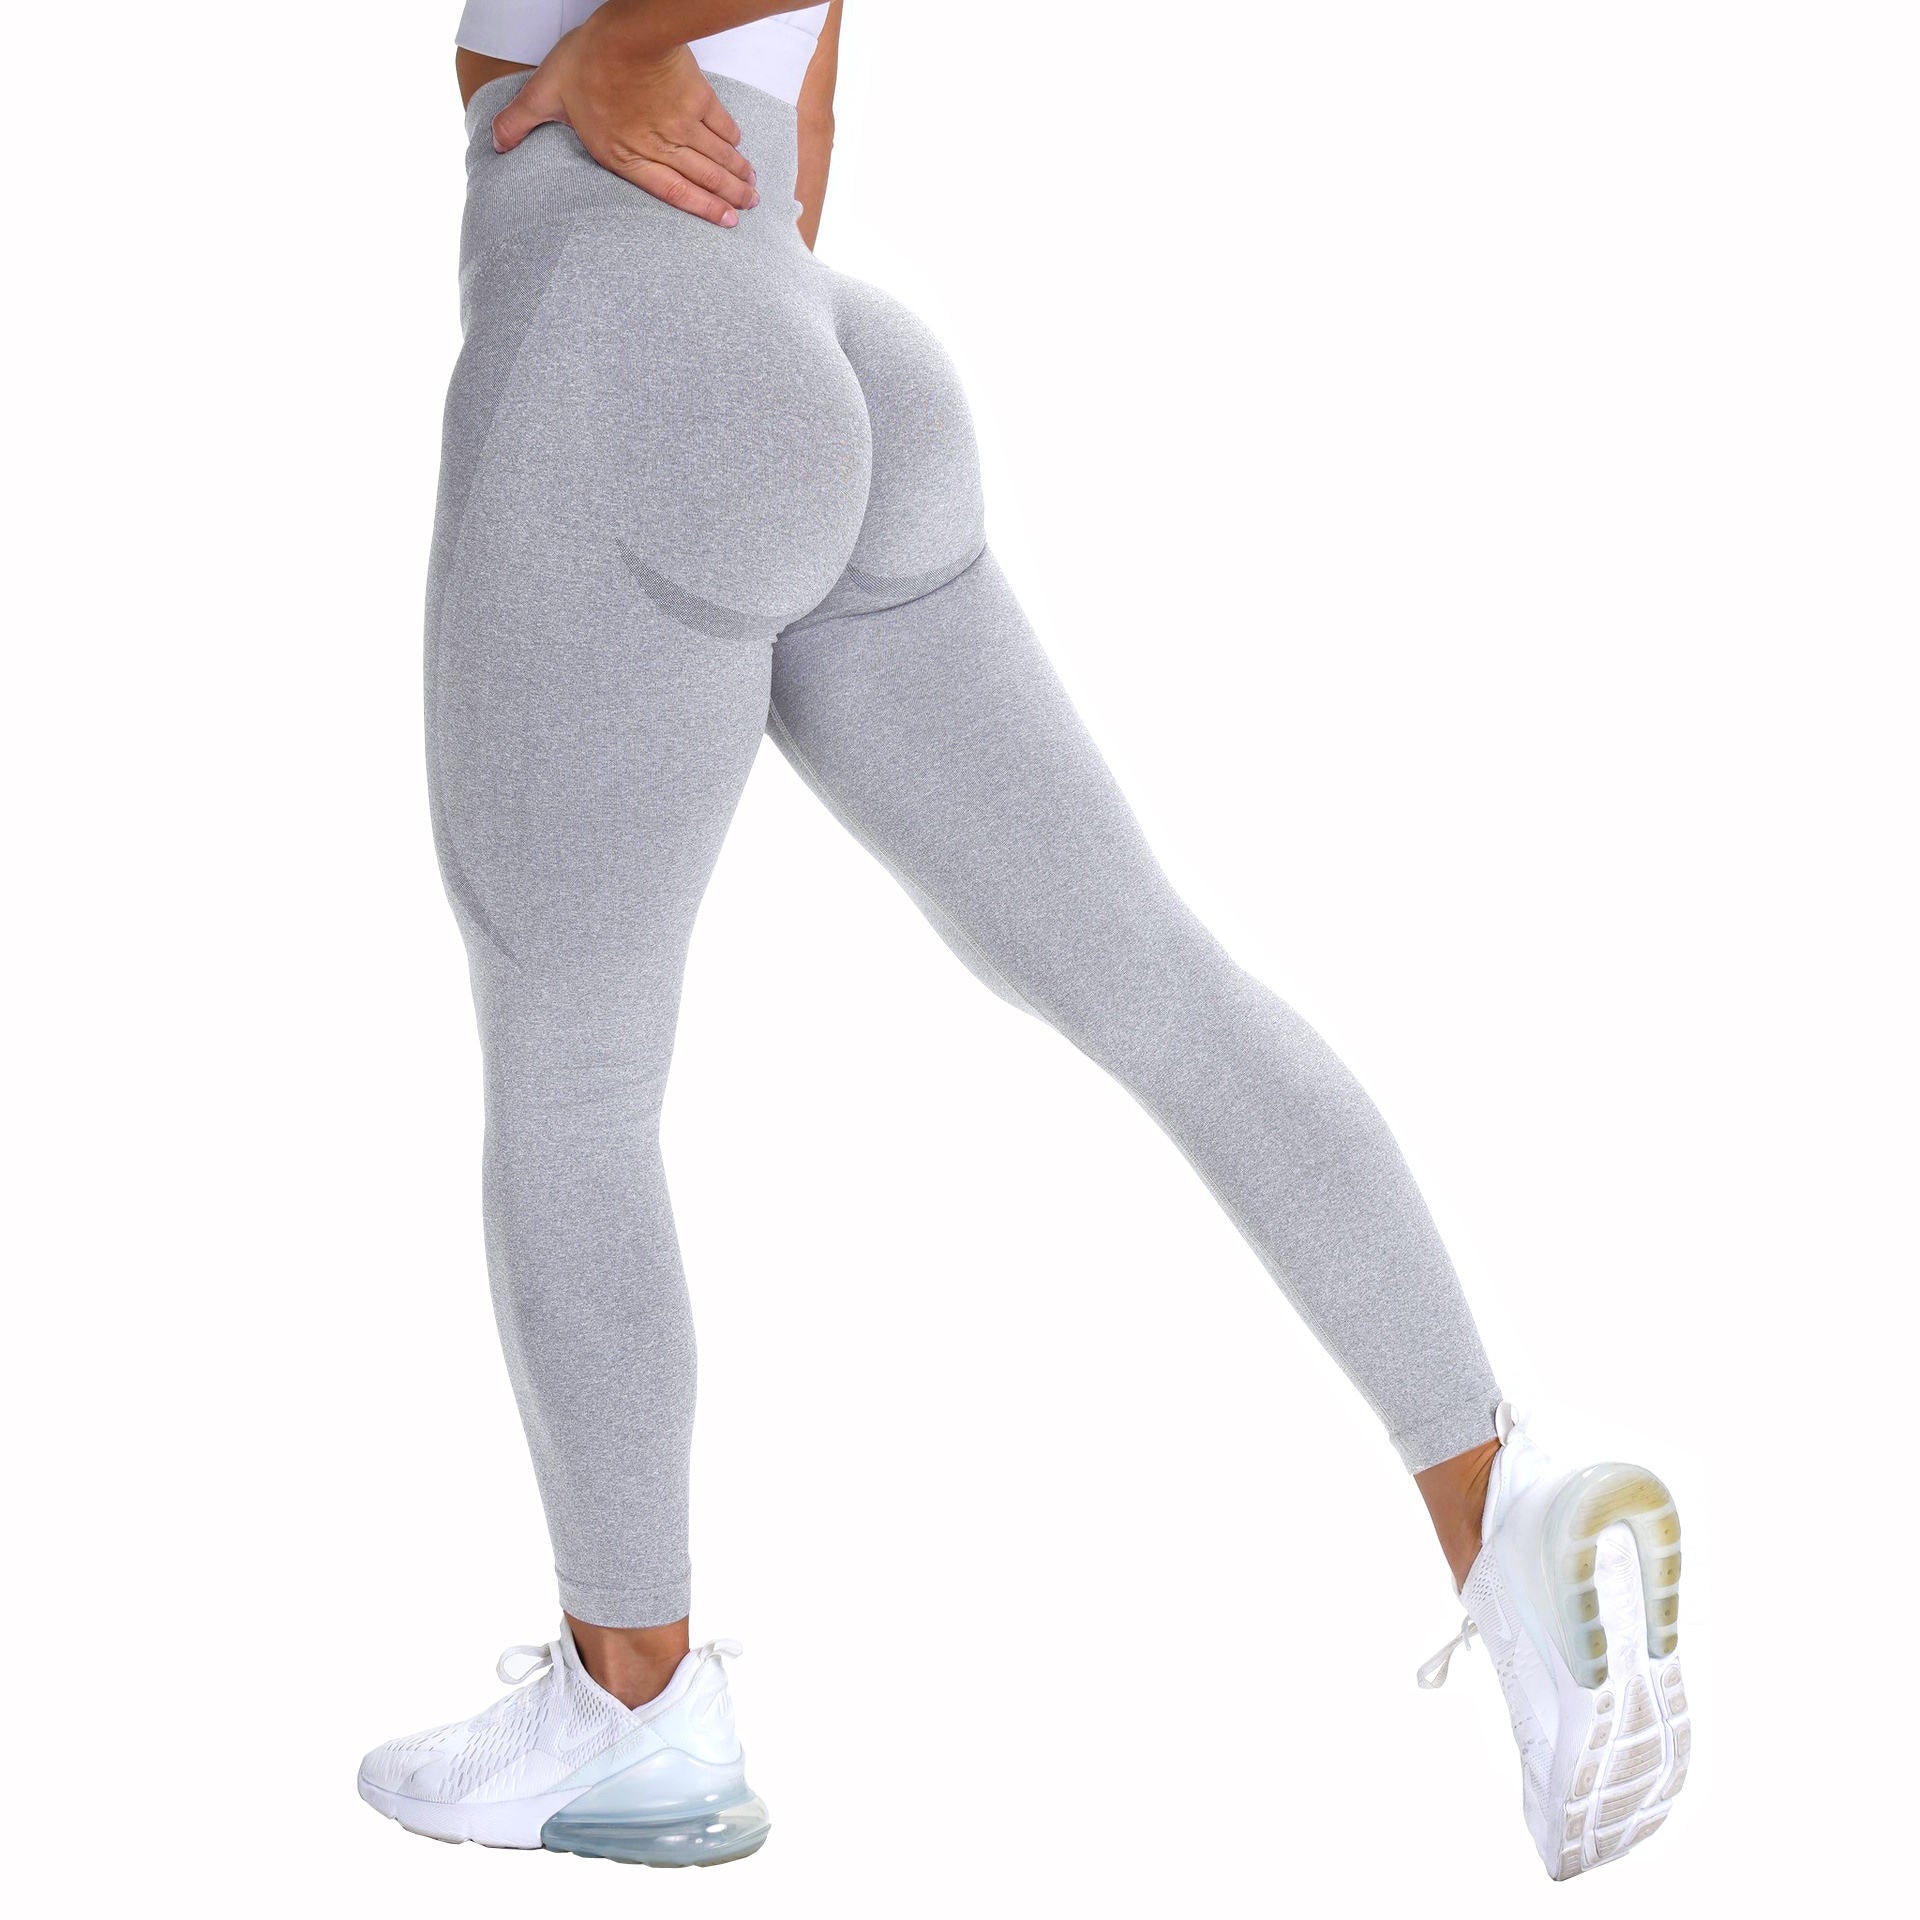 Avamo Women Tommy Control Super High Waist Leggings Waistband Workout Yoga  Pants Tummy Control Stretchy Workout Leggings Tights 